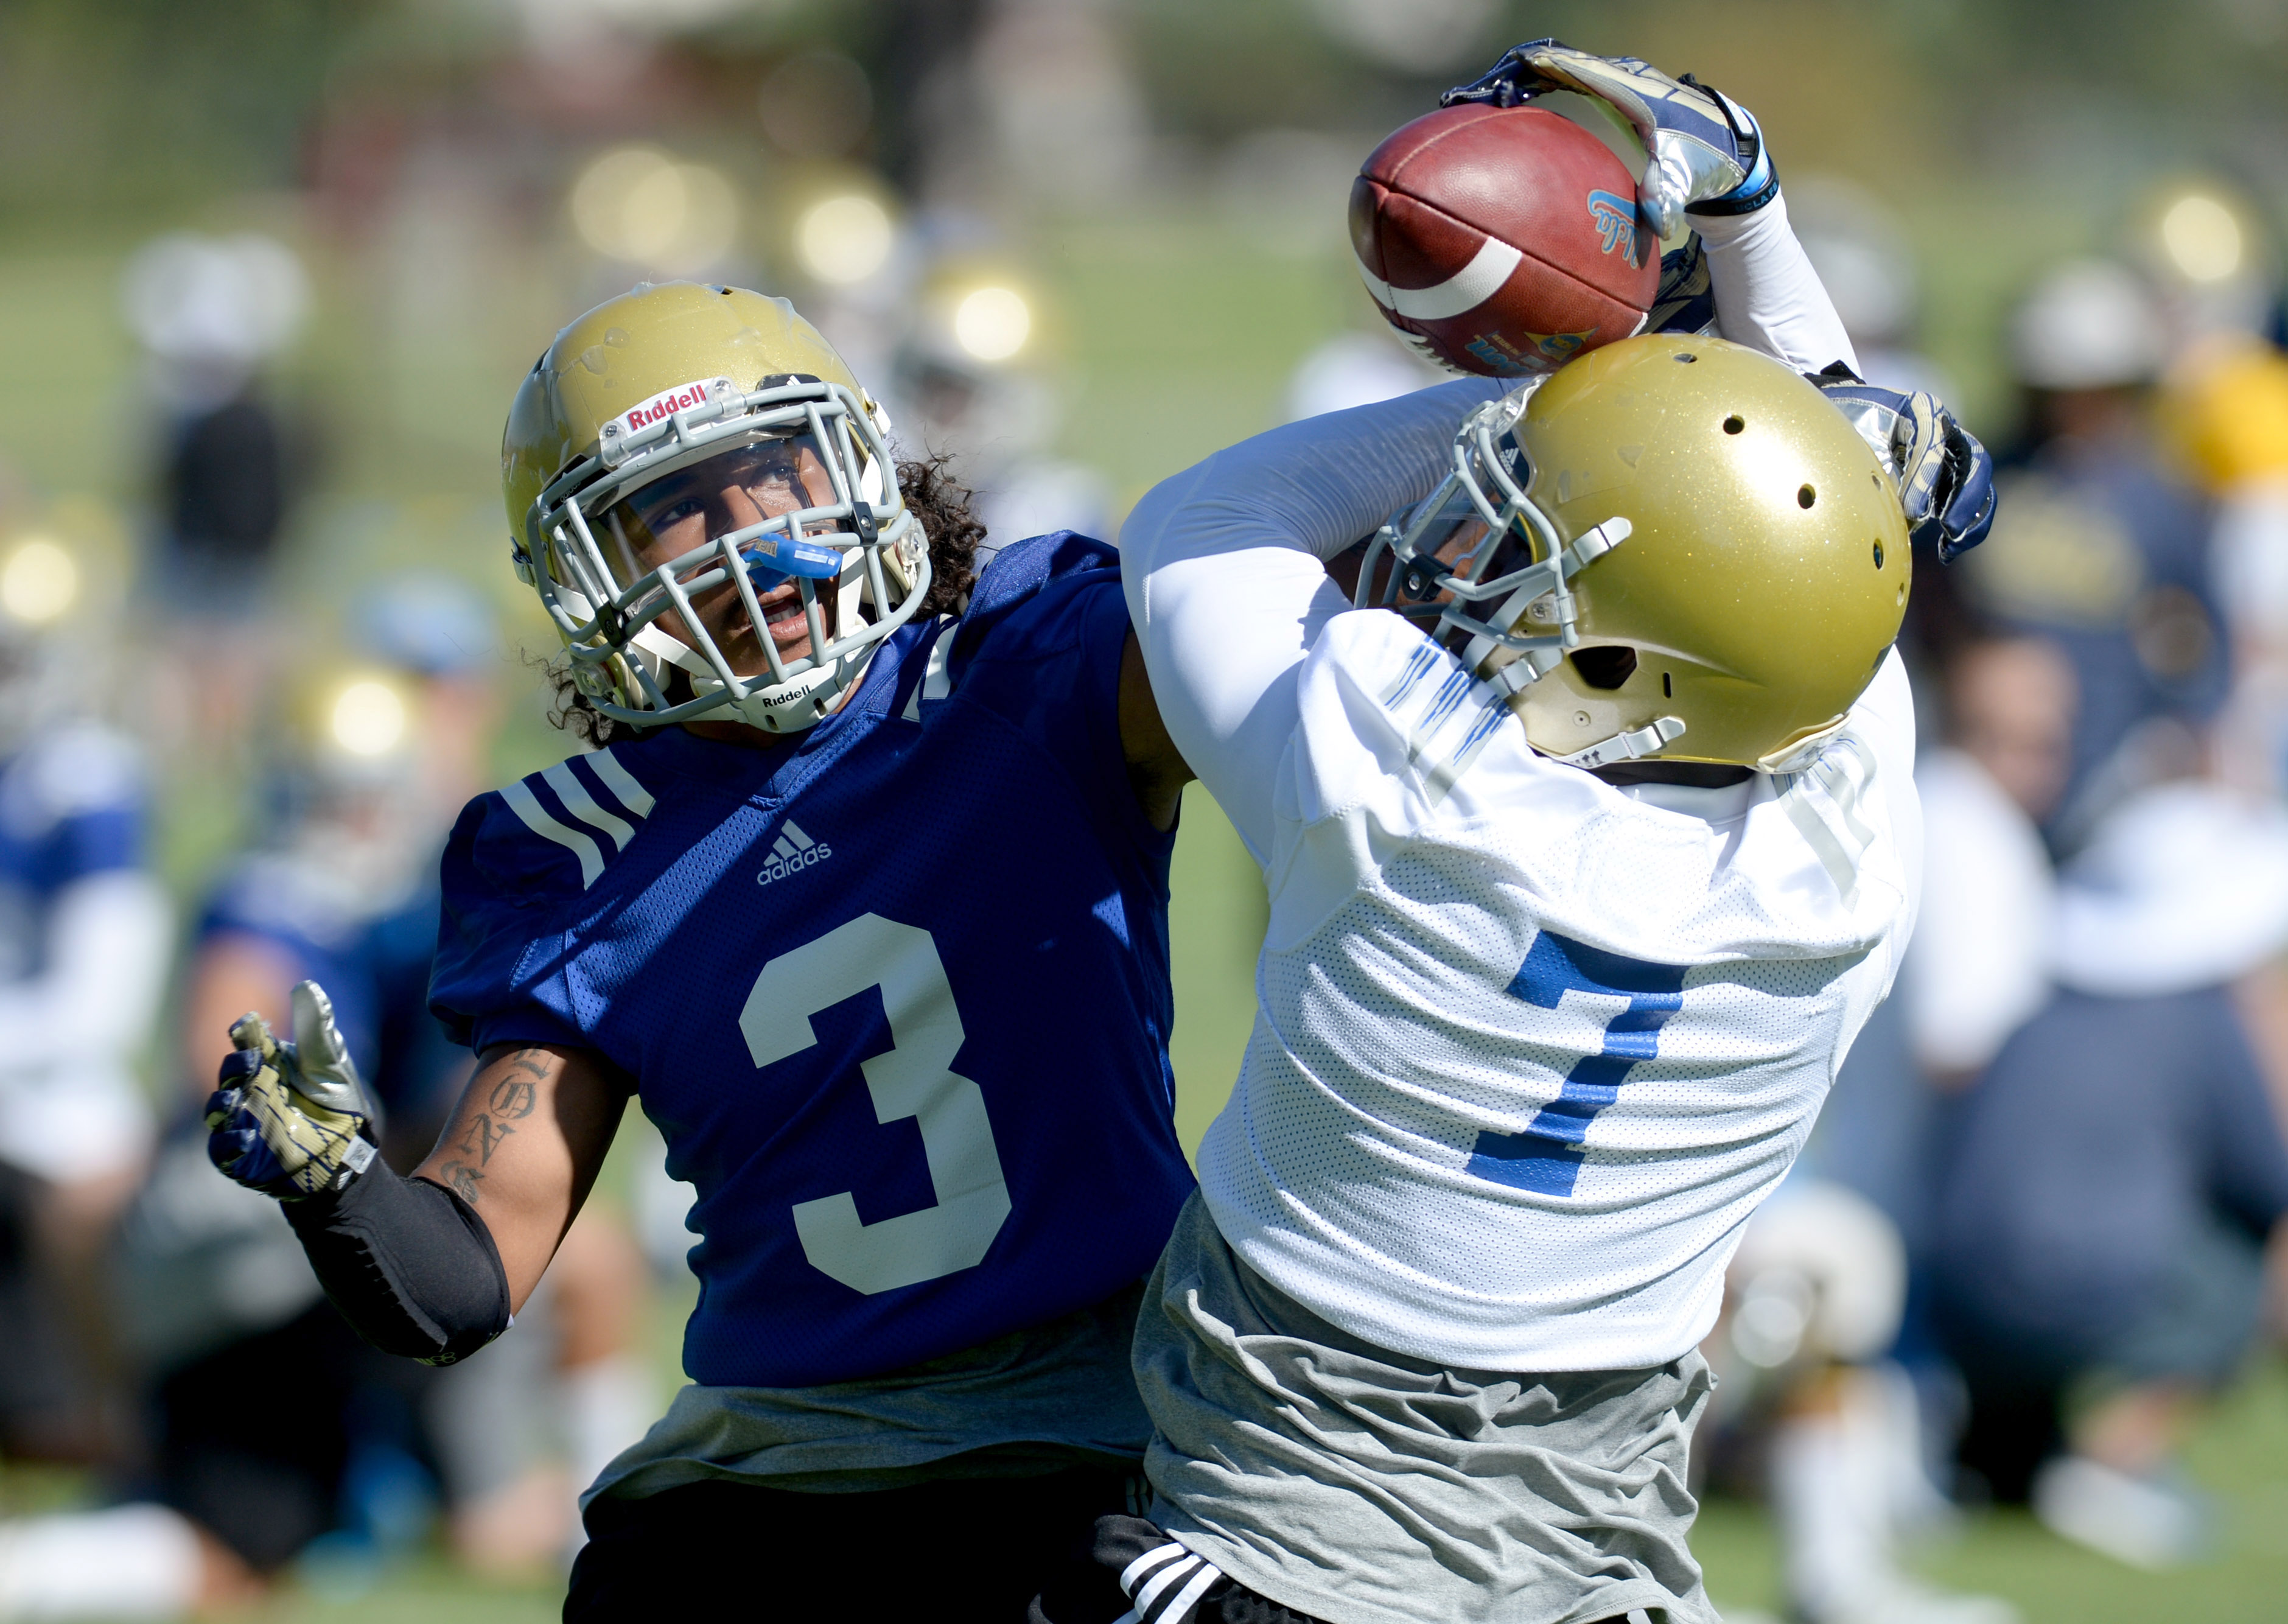 UCLA safety Randall Goforth will miss the season after separating both shoulders earlier this year. He is pictured practicing in San Bernardino on Aug. 5, 2014. ( John Valenzuela/The Sun)